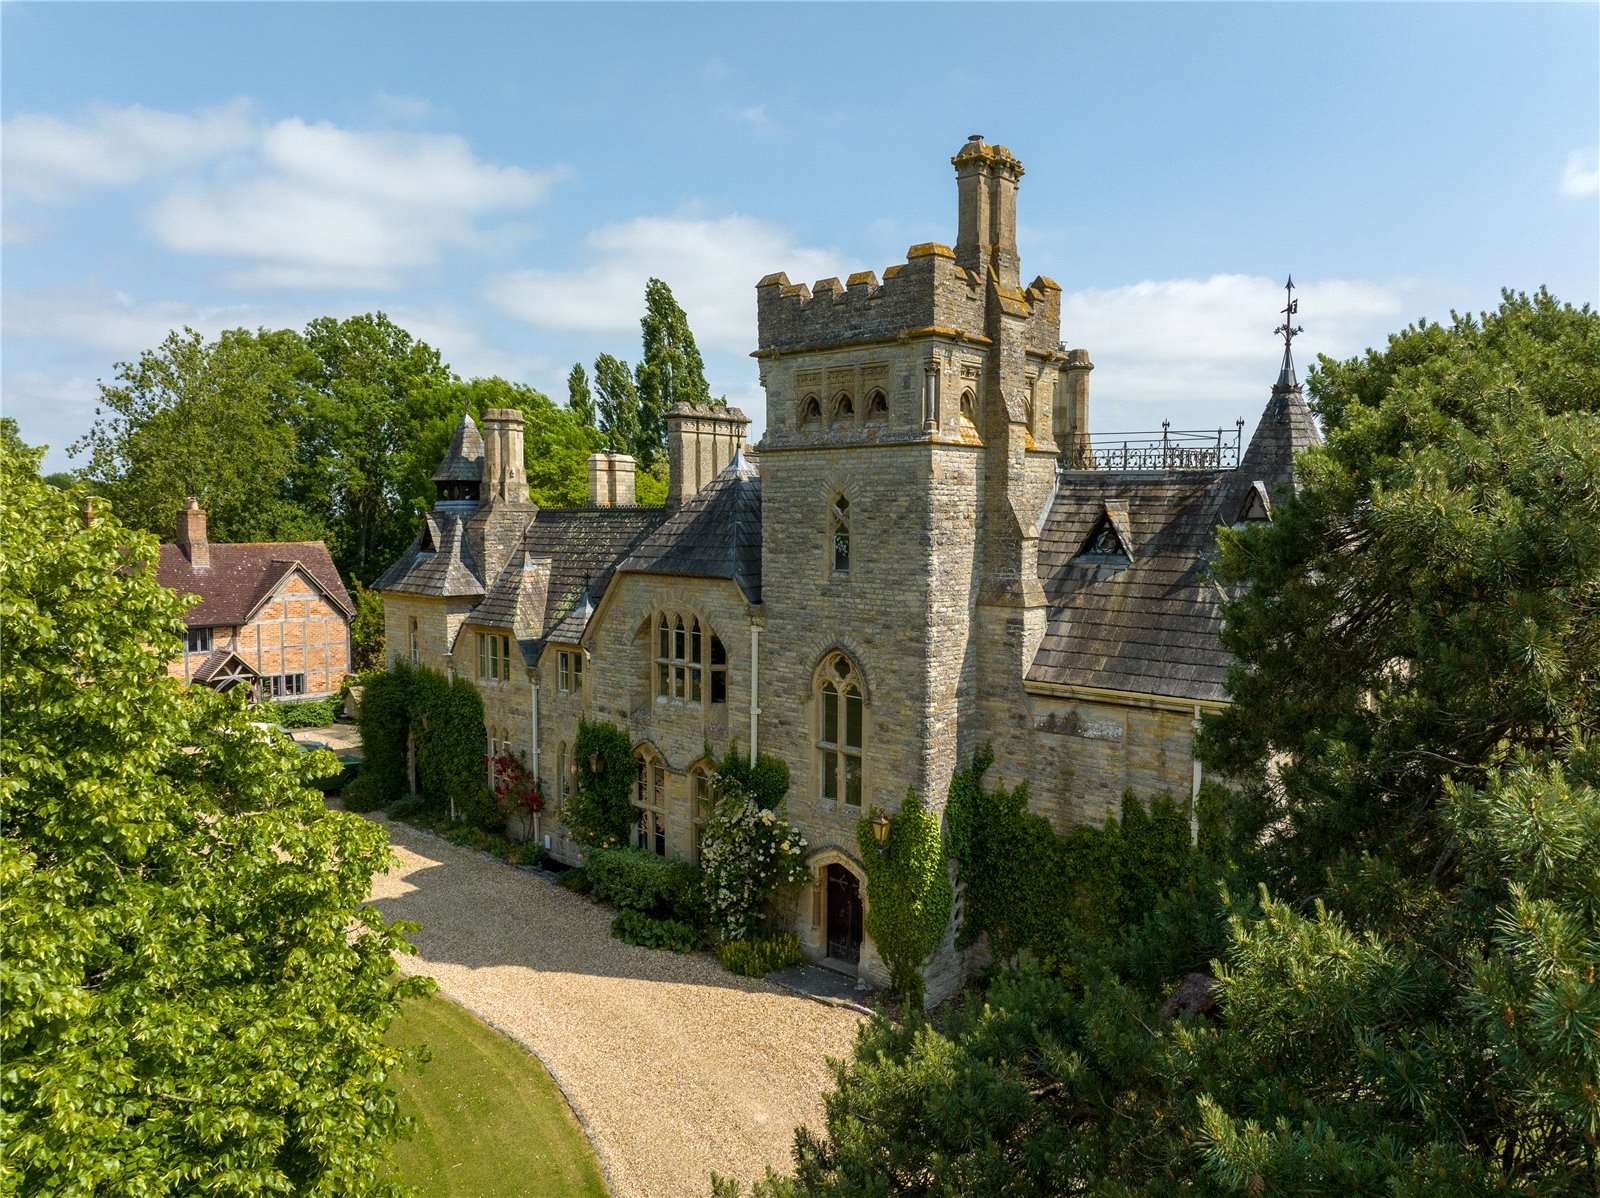 19 Breathtaking Homes For Sale From £450,000 To £8 Million, As Seen In Country Life